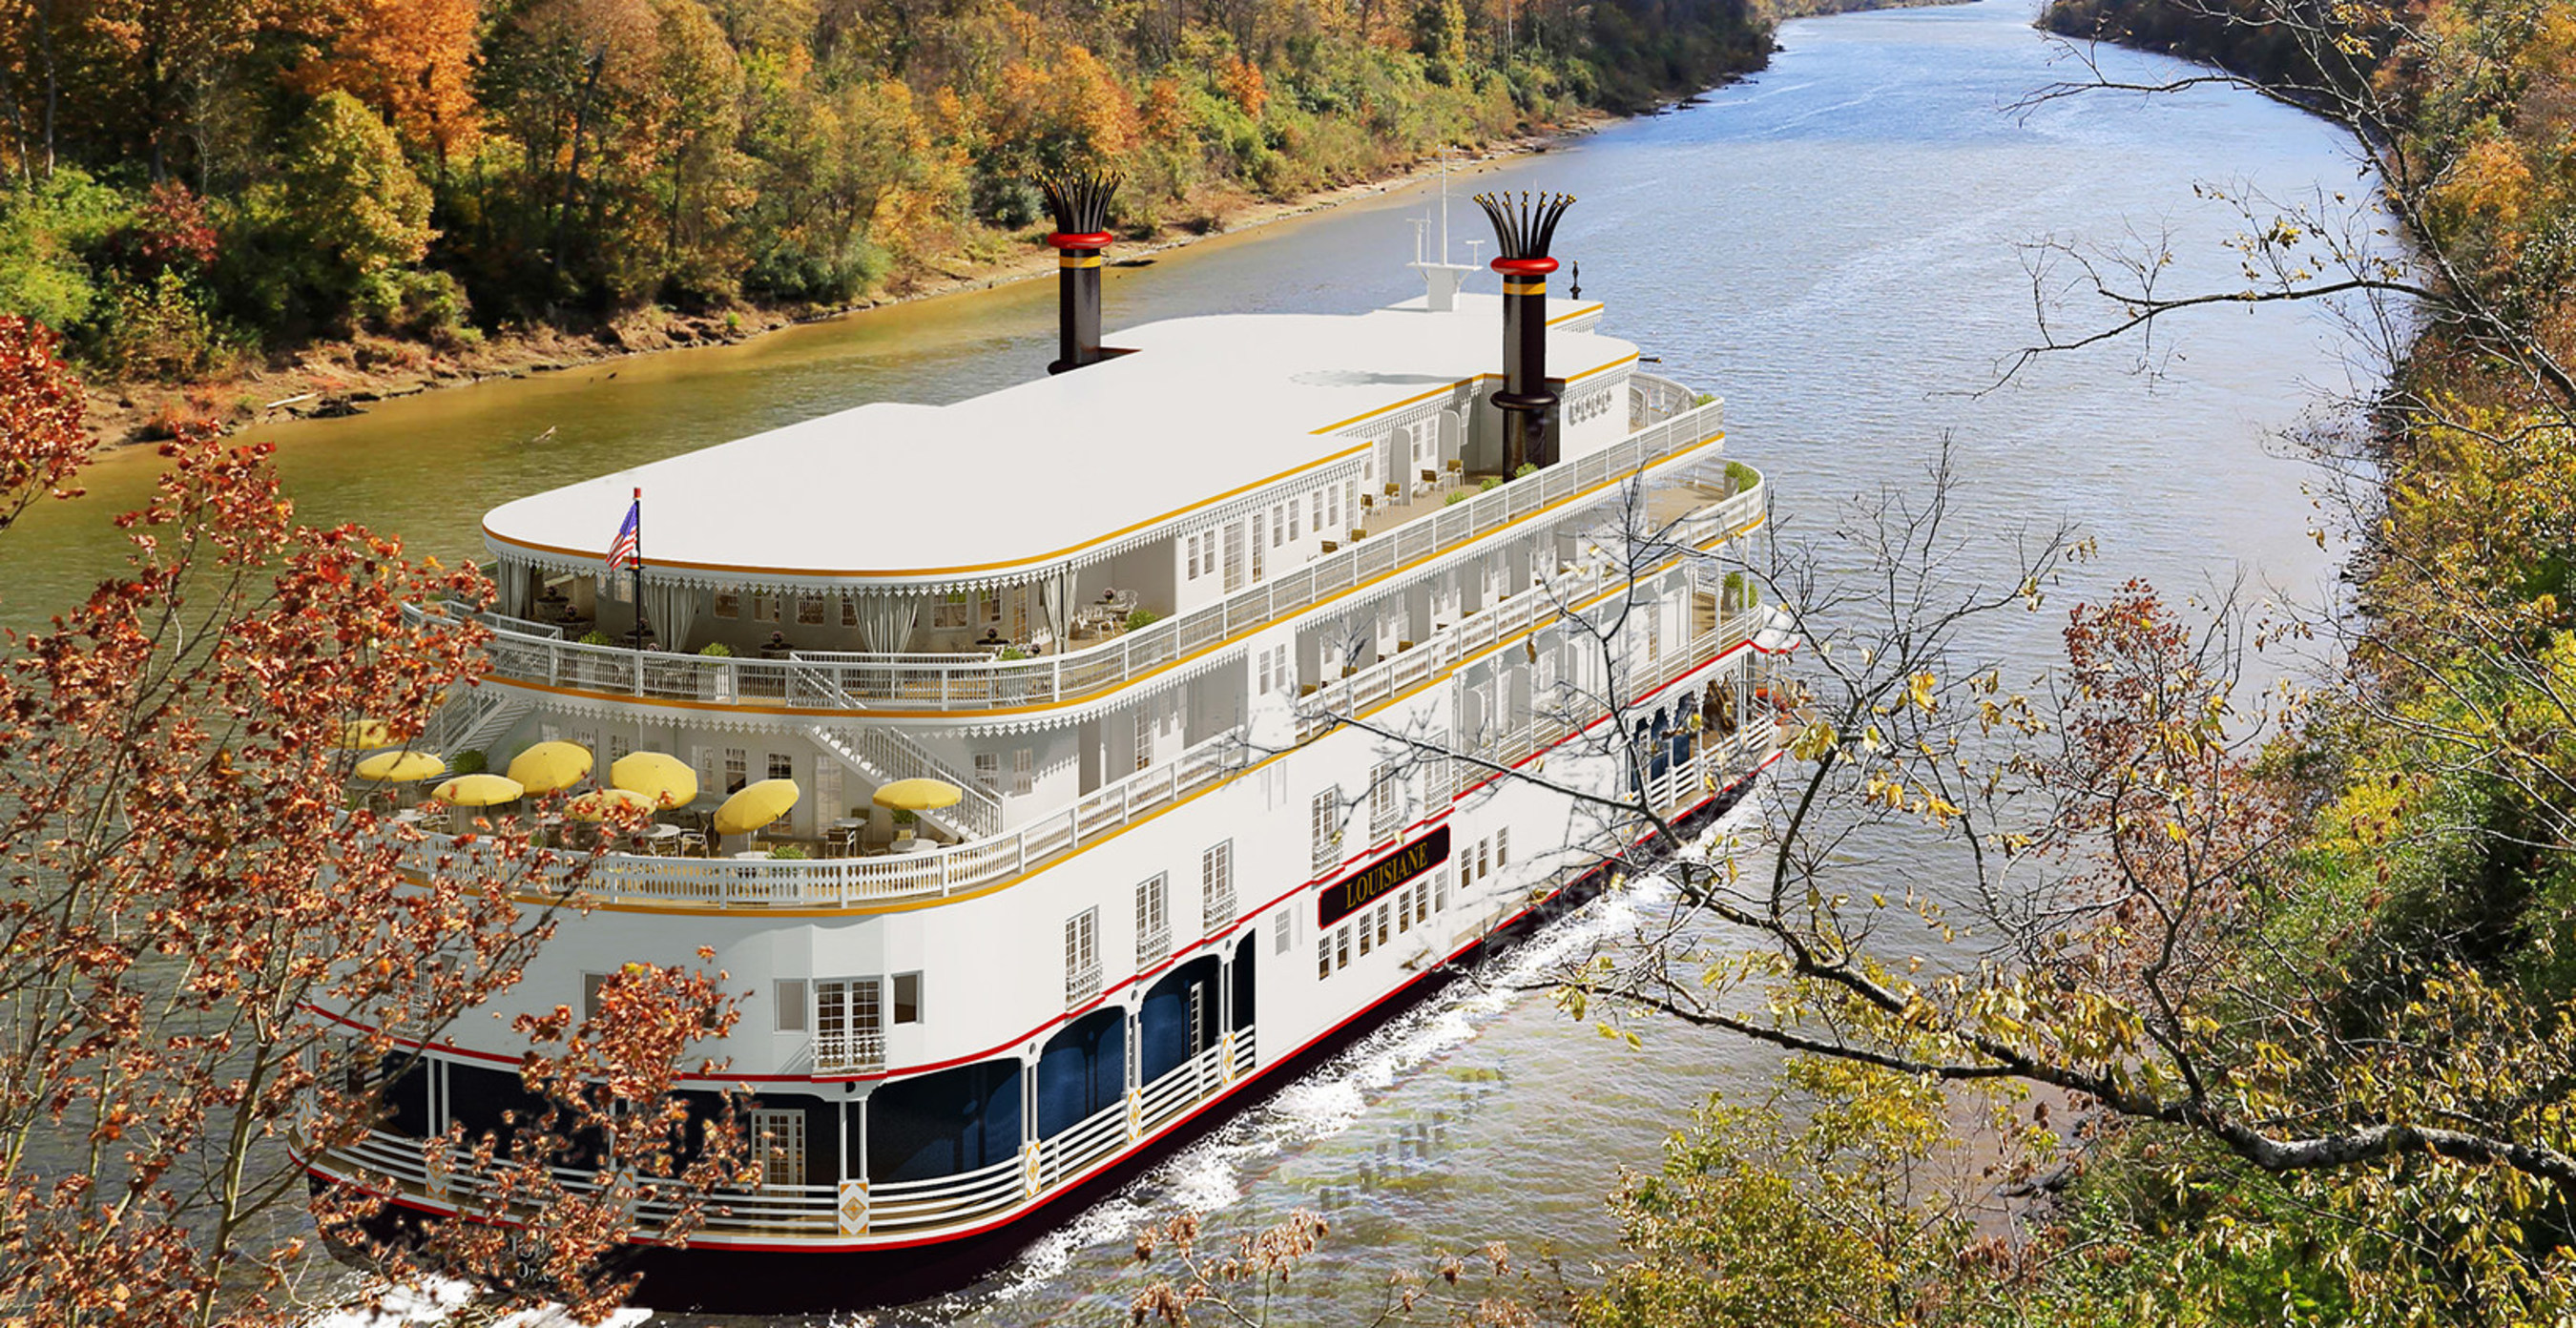 Louisiane, an intimate riverboat for just 150 guests, begins her inaugural year on September 30, 2016, with first embarkation October 1; 2017 cruise tours start March 4, 2017